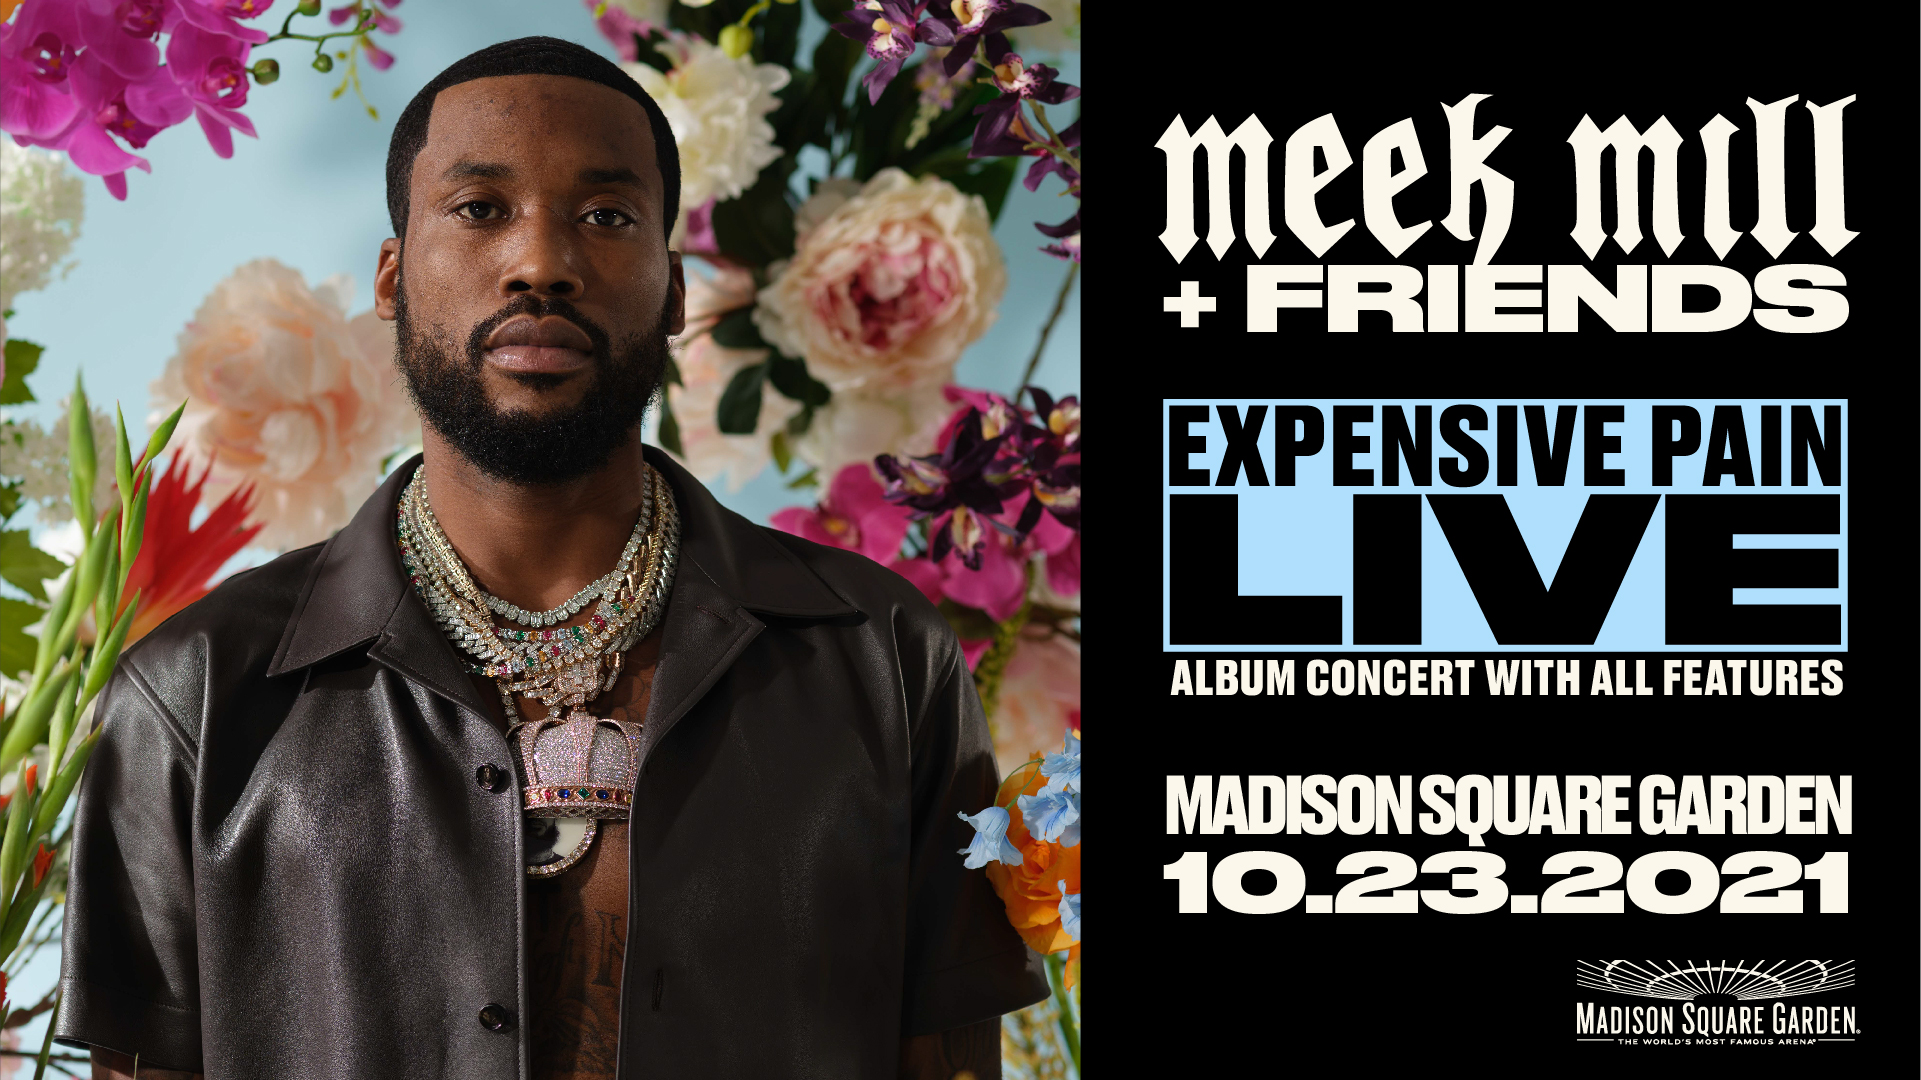 Photo Gallery: Meek Mill's Madison Square Garden Concert